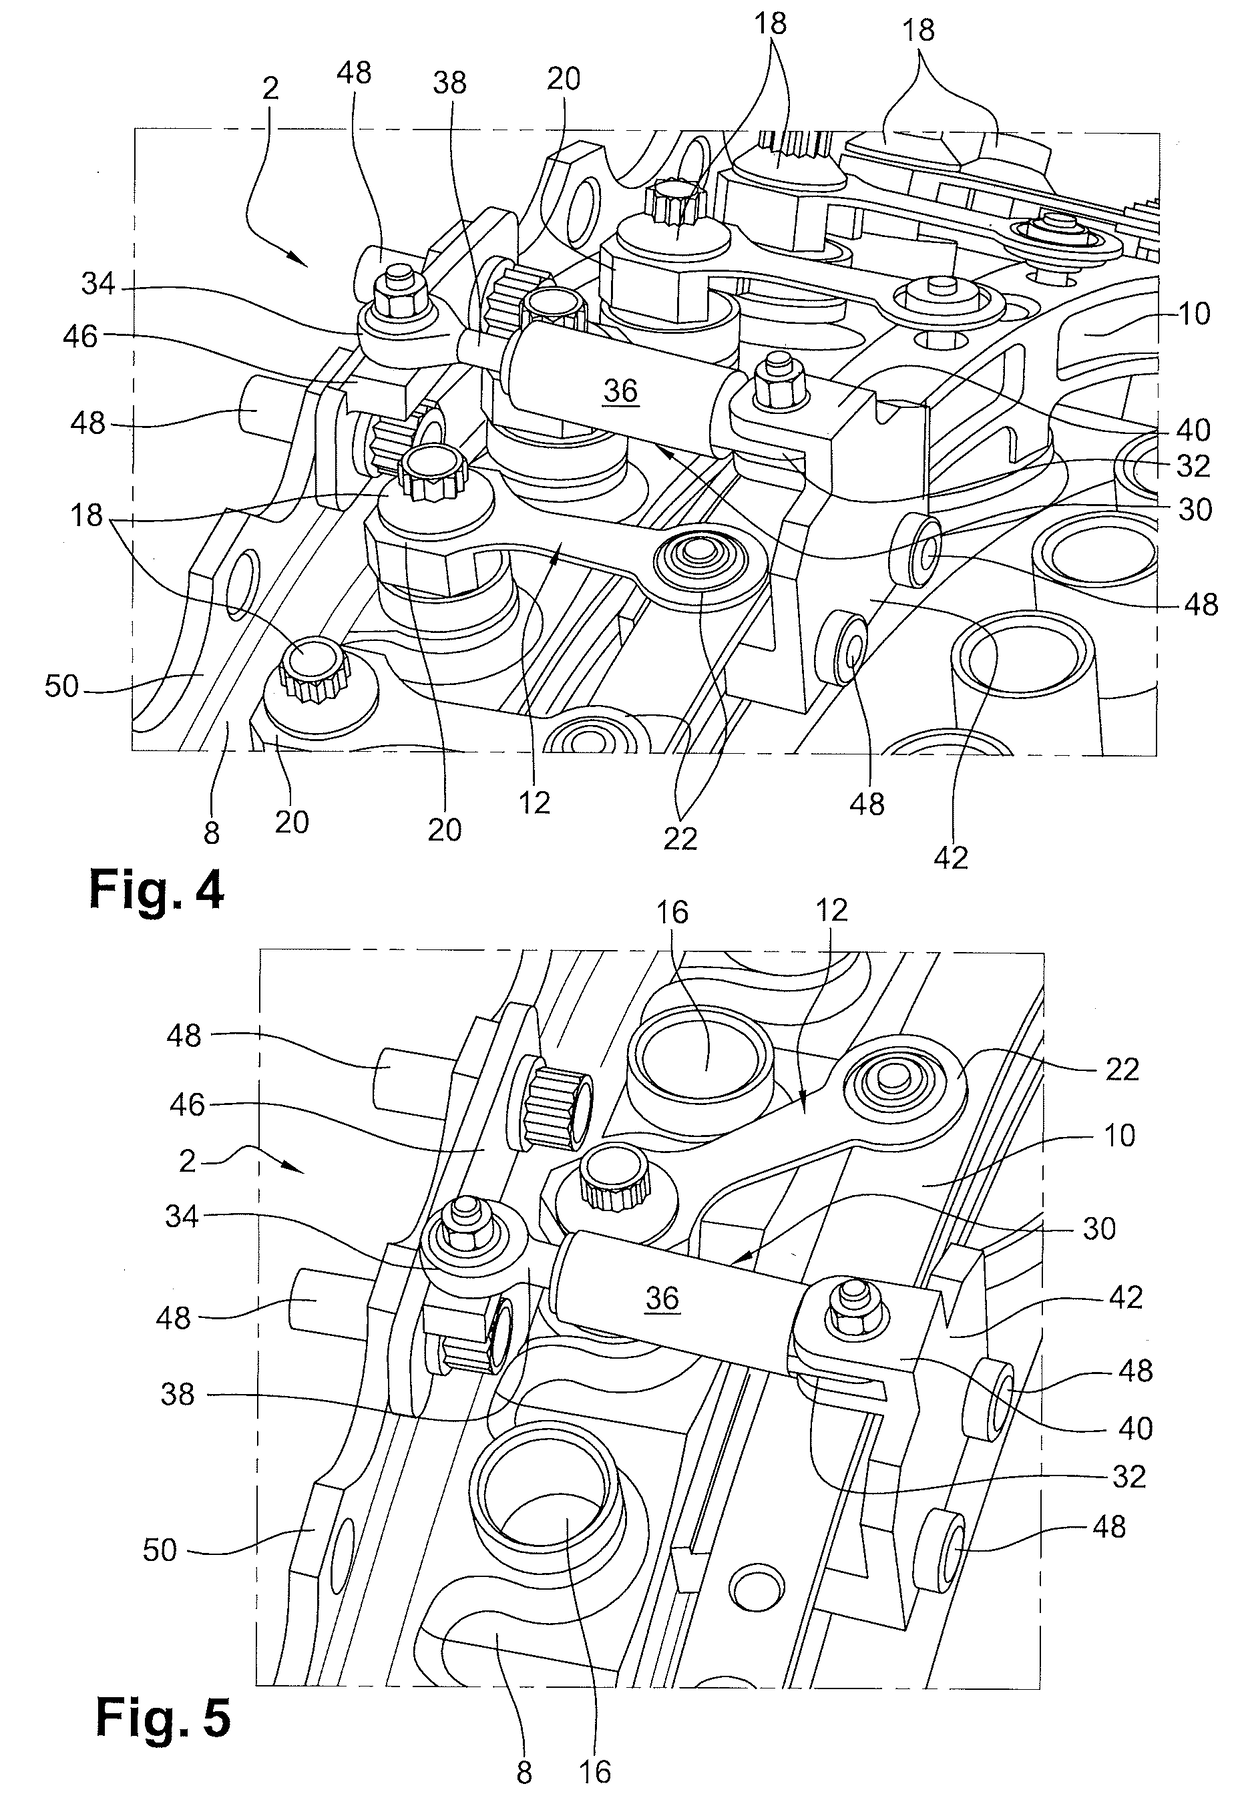 Assembly for controlling variable pitch vanes in a turbine engine